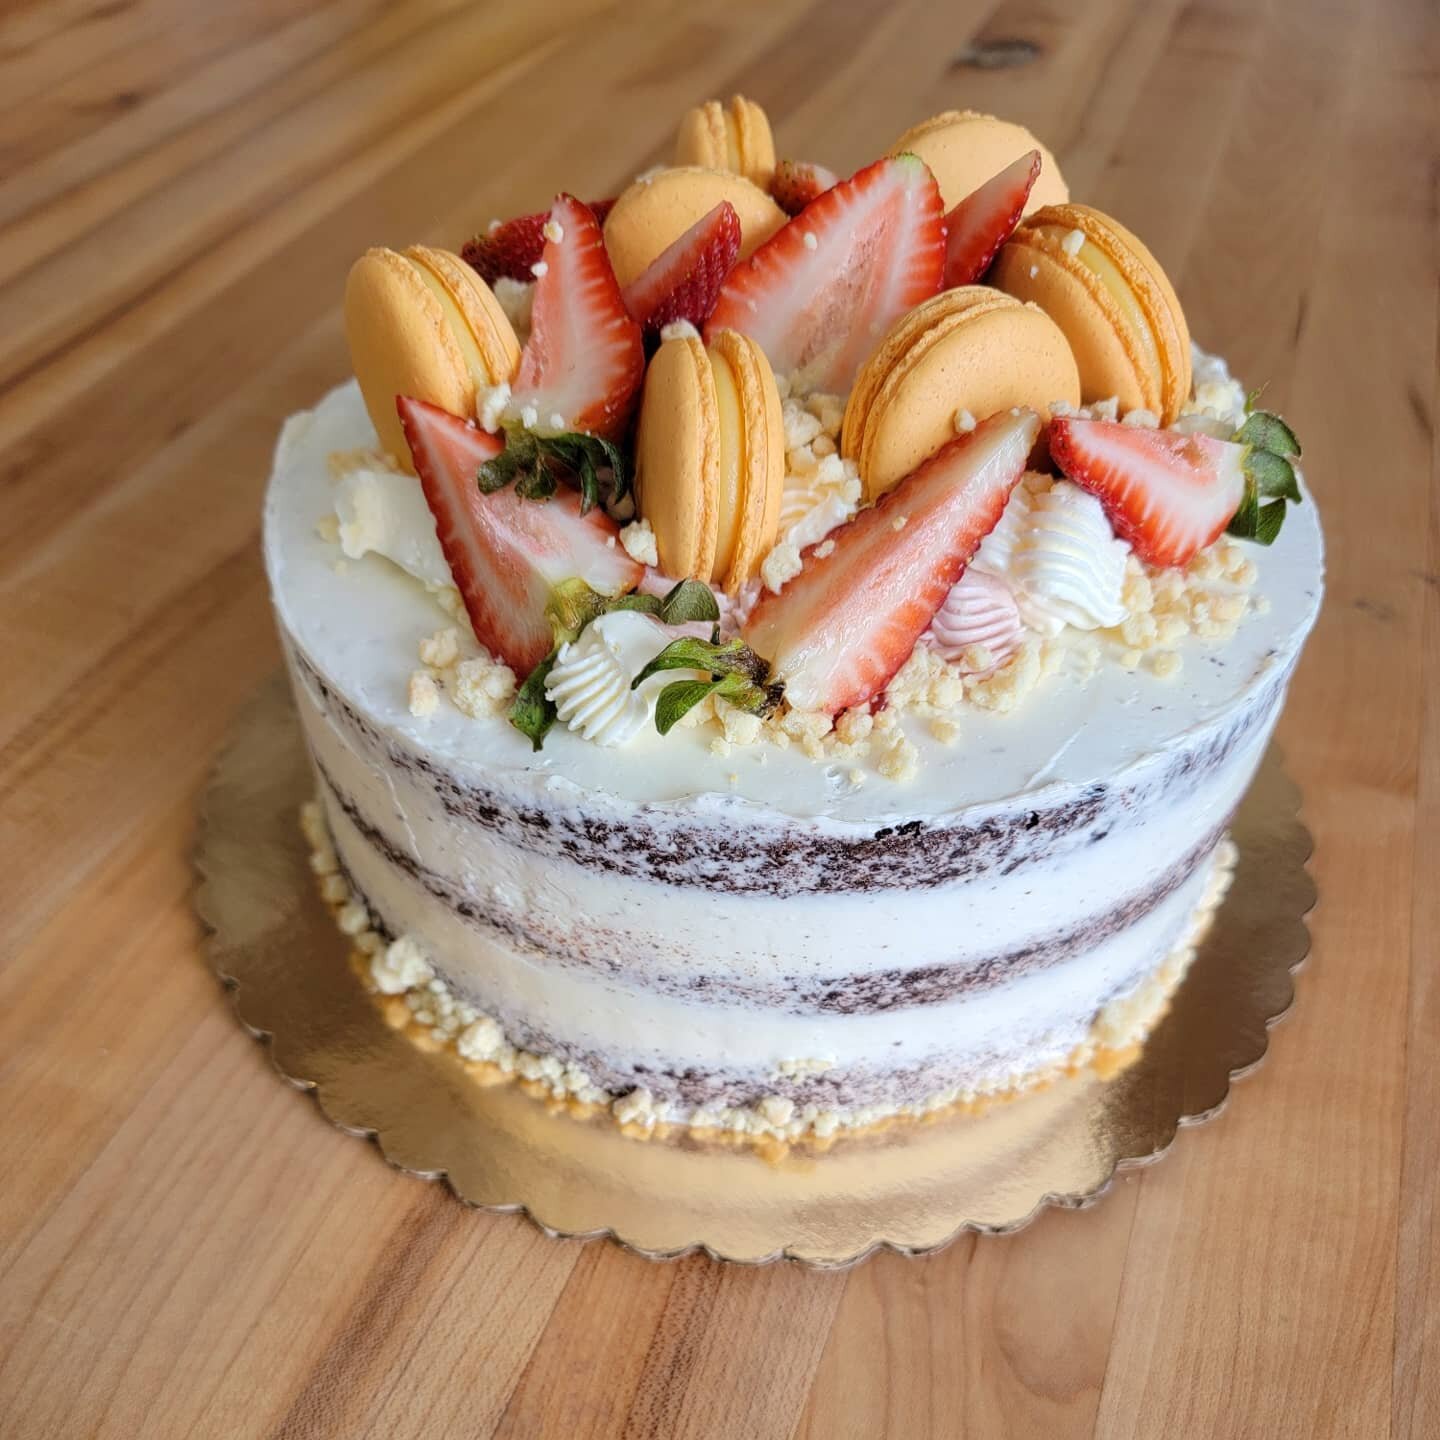 Sometimes I wish I could eat the cakes I make for people 🥲. Always happy to make cake for others, love eating cake, but lazy to make myself cake 🤔😅😬 so I buy cake 😂😂😂

Preorders for our pastry pick up is open! Check the link in our bio~

🎂: 8